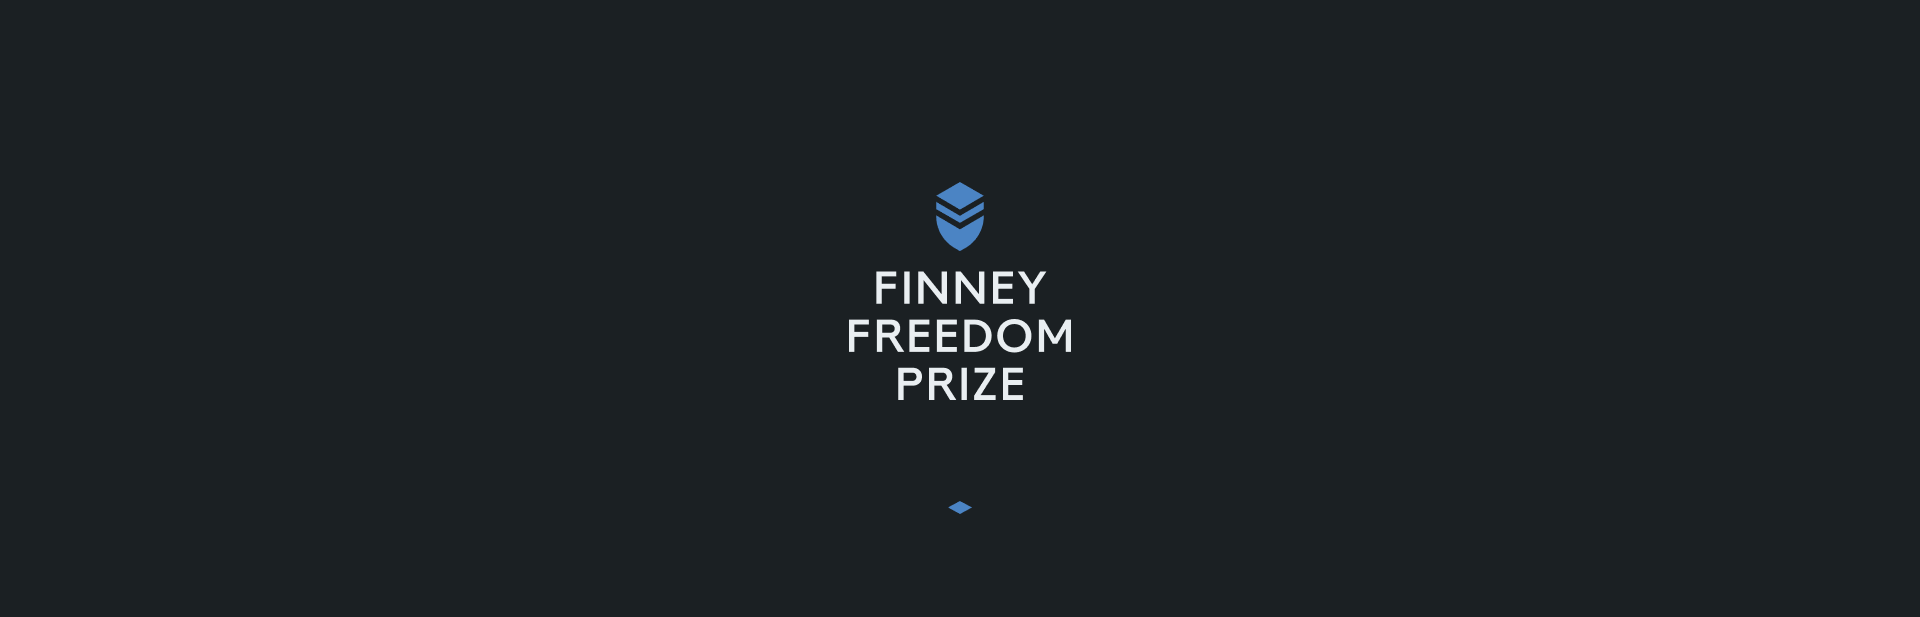 HRF Launches the Finney Freedom Prize